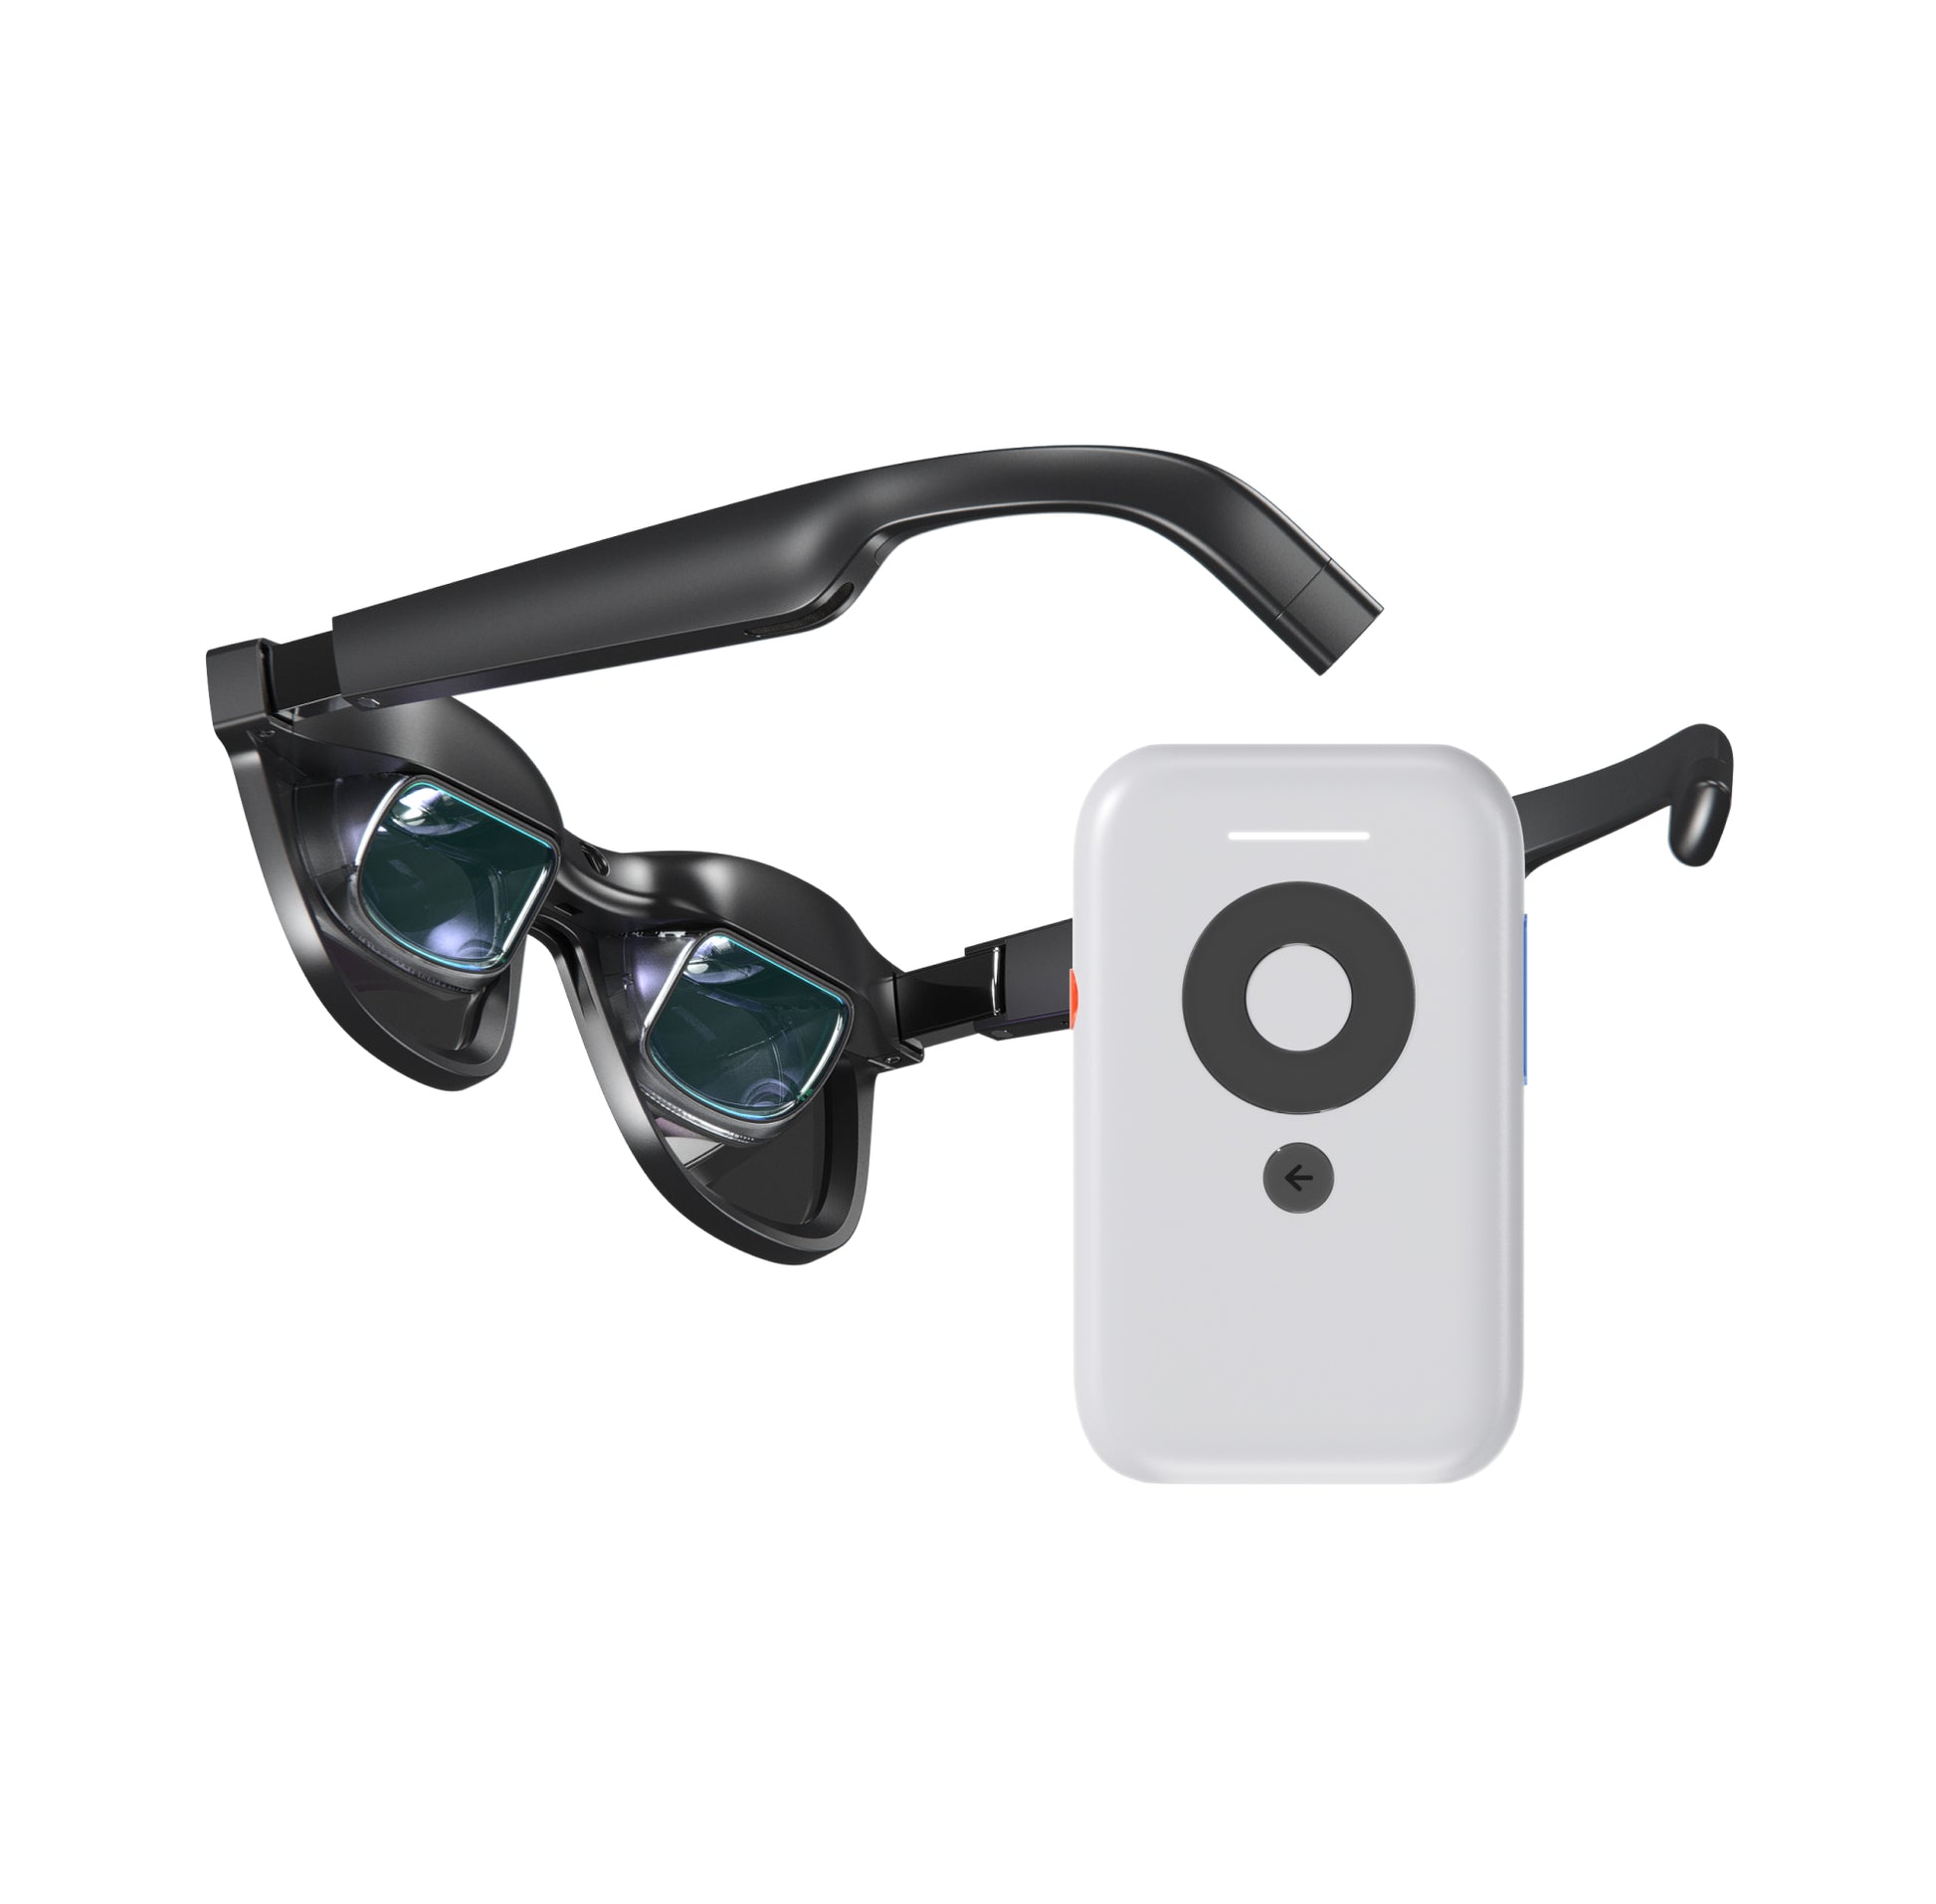 Xreal Air 2 AR Glasses With Xreal Beam Smart Terminal 330 Giant Screen  Cinema